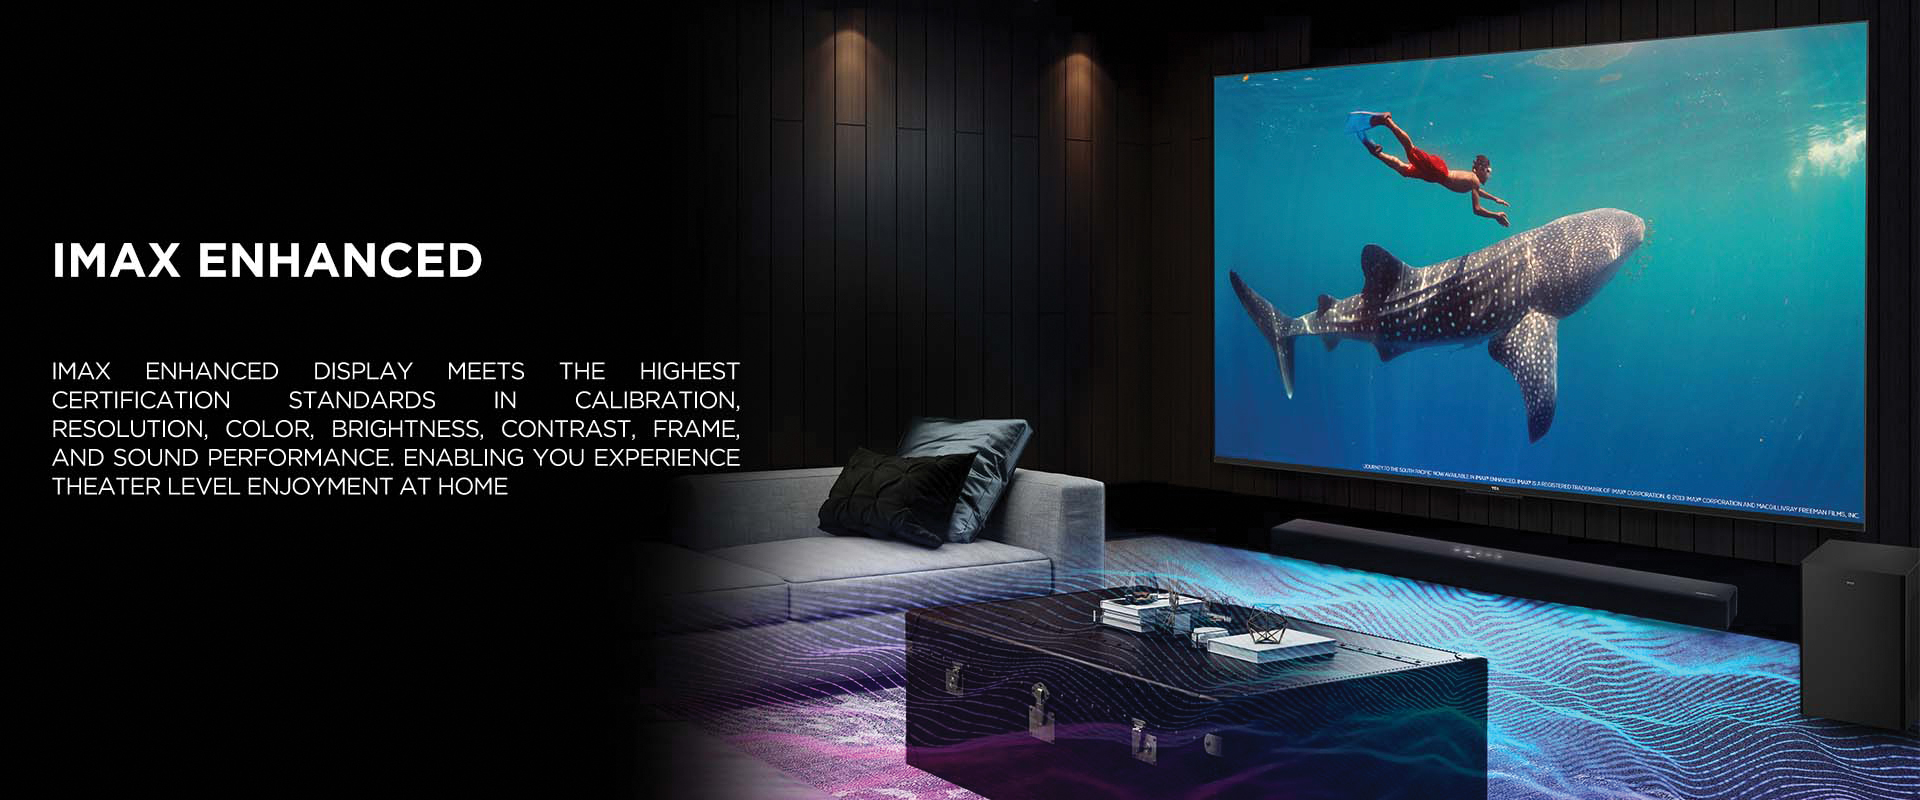 IMAX ENHANCED - IMAX Enhanced display meets the highest certification standards in calibration, resolution, color, brightness, contrast, frame, and sound performance. Enabling you experience theater level enjoyment at home